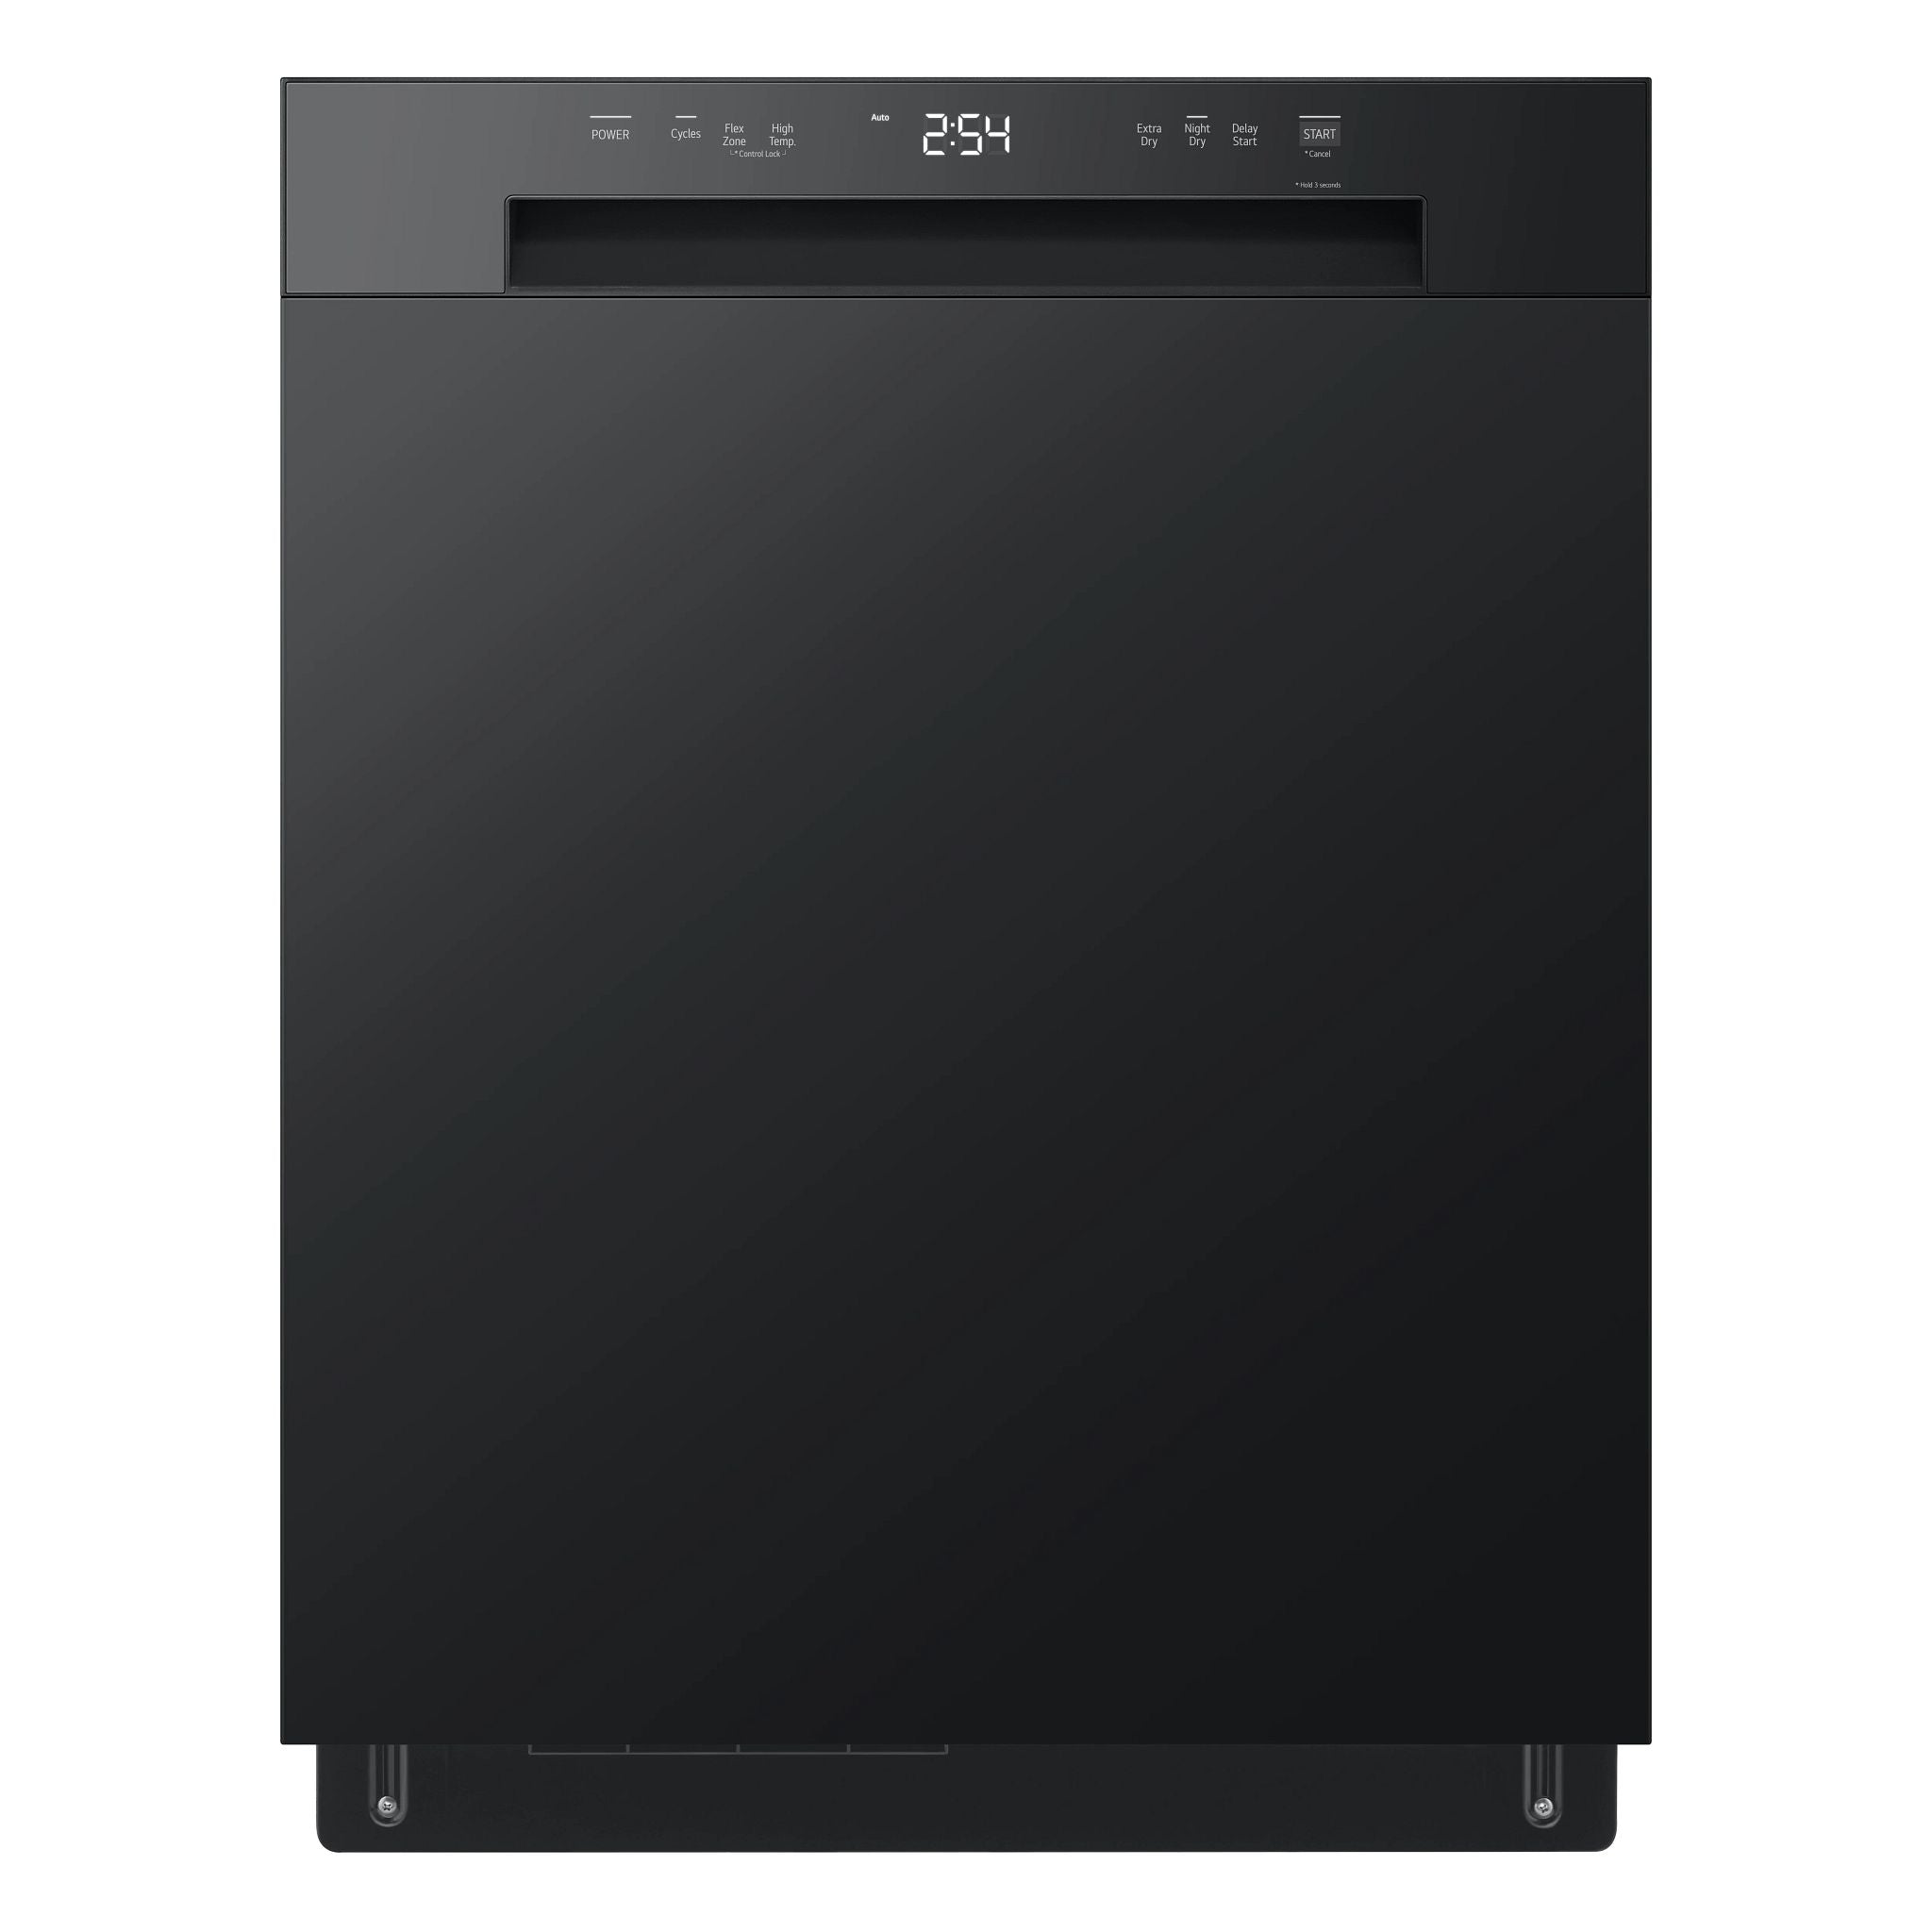 Lg Front Control Dishwasher with LoDecibel Operation and Dynamic Dry™